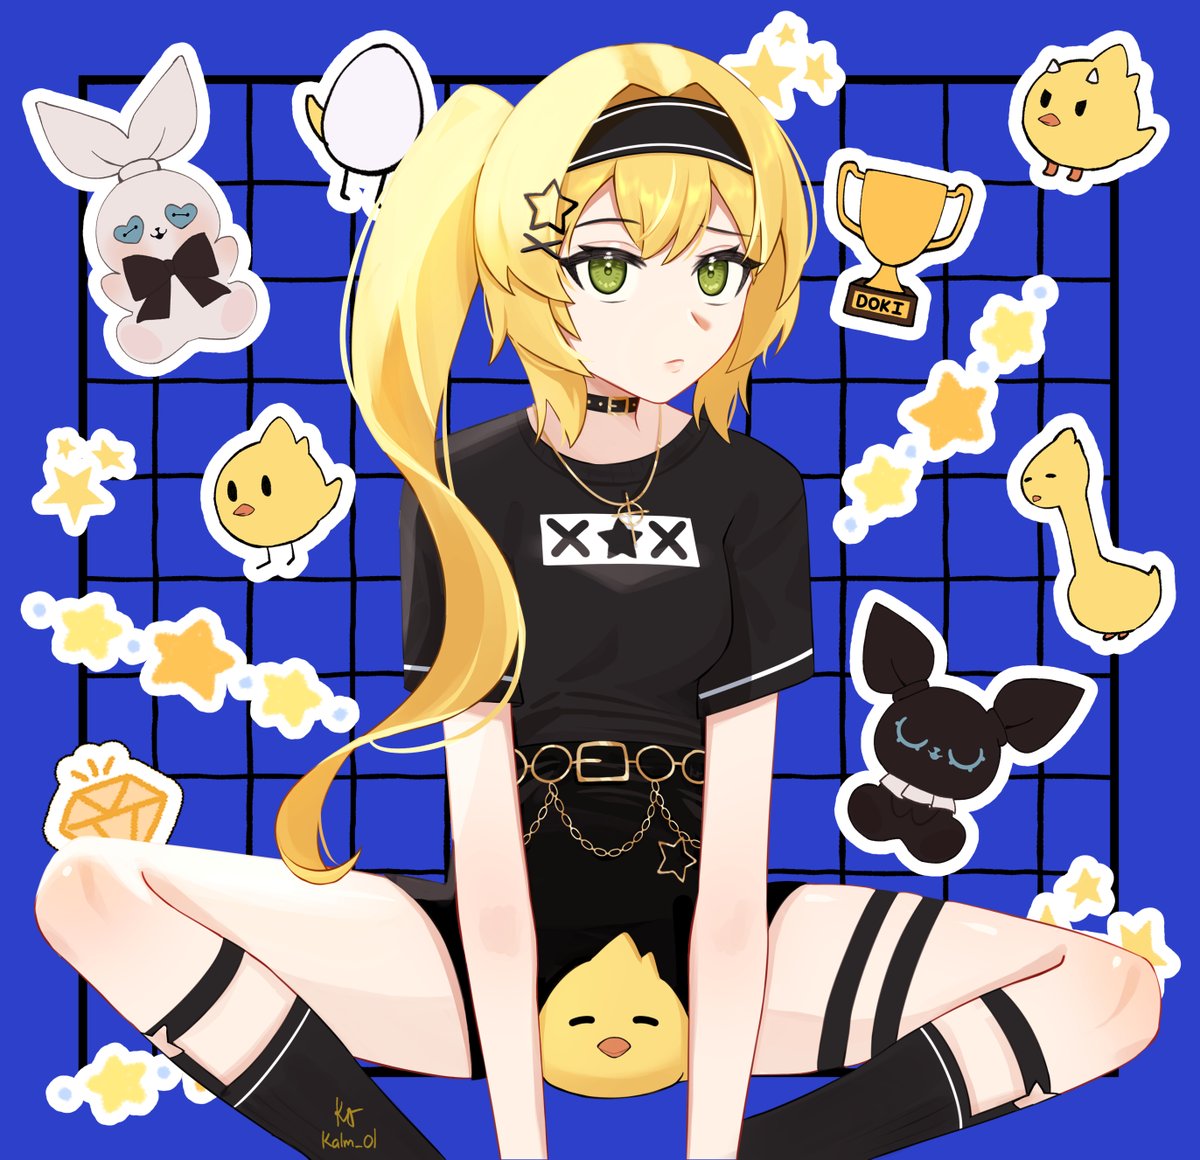 🖤💛
#DokiGallery